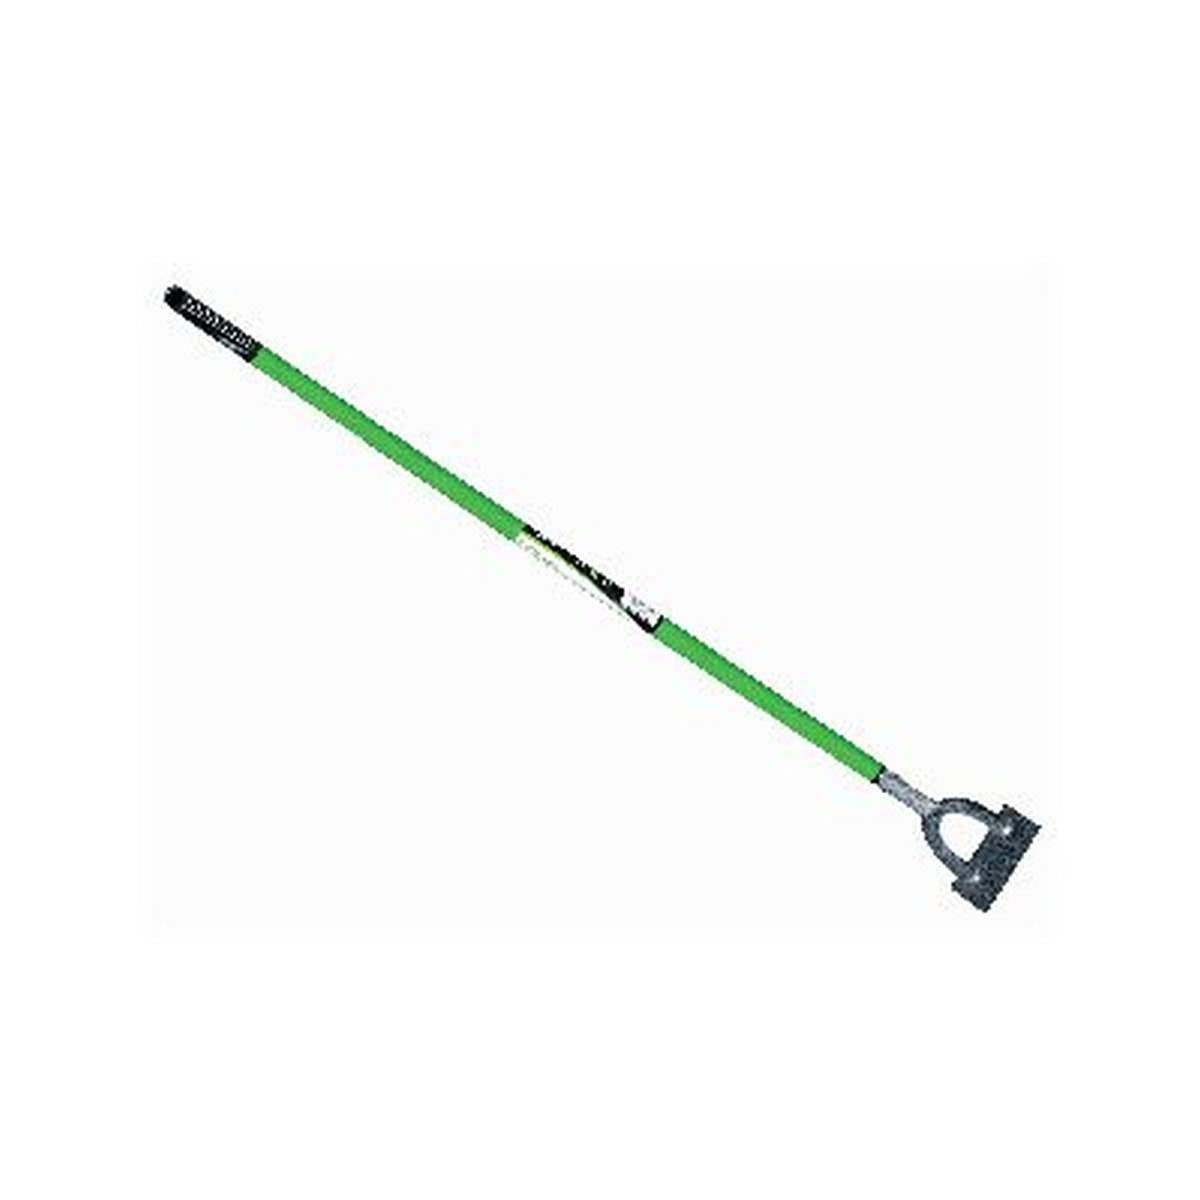 GREENBLADE GREEN BLADE DUTCH HOE WITH PLASTIC COATED STEEL SHAFT BB-GH100